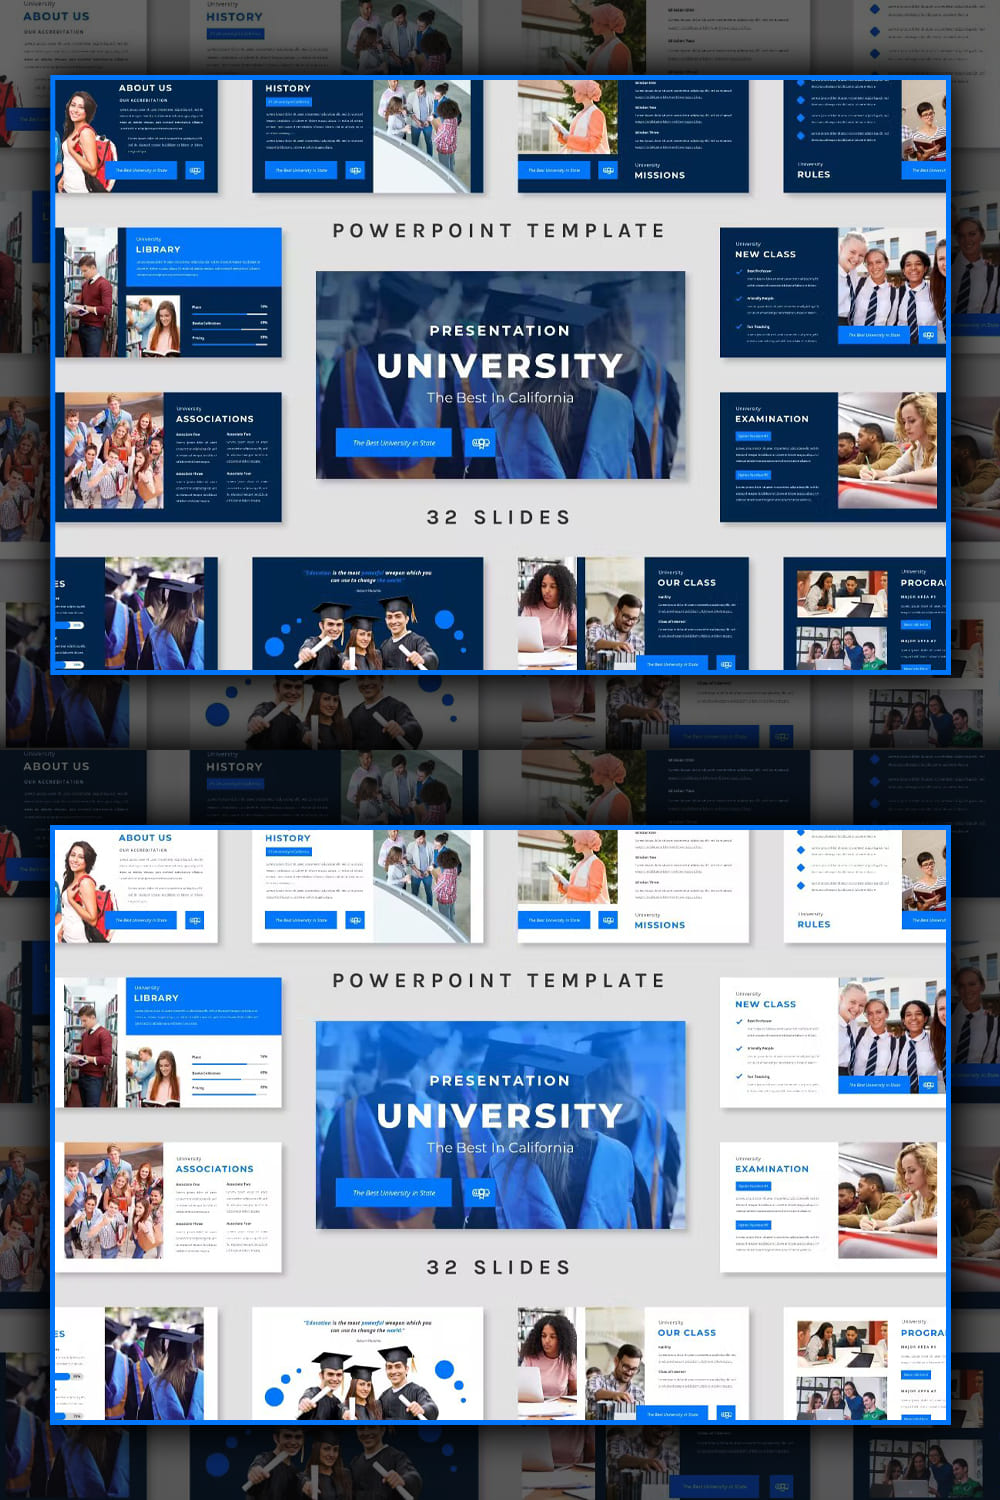 University powerpoint template 2 version, picture for Pinterest 1000x1500.